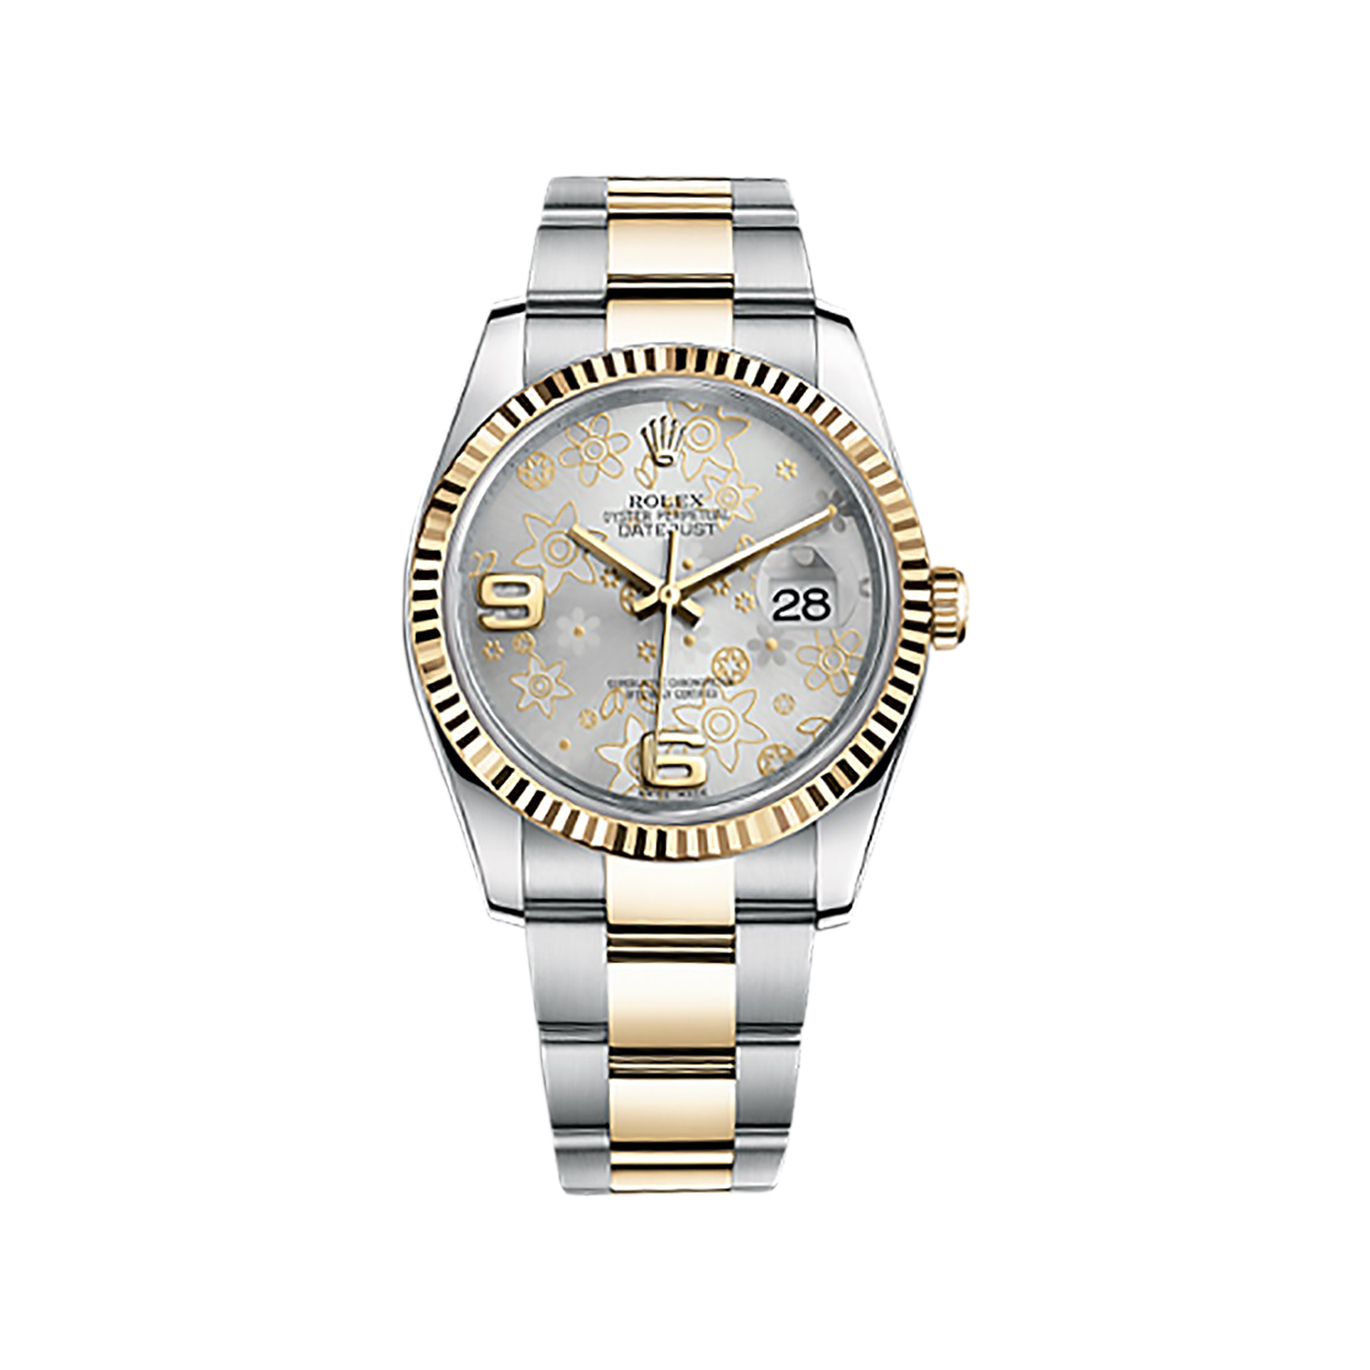 Datejust 36 116233 Gold & Stainless Steel Watch (Silver Floral Motif)